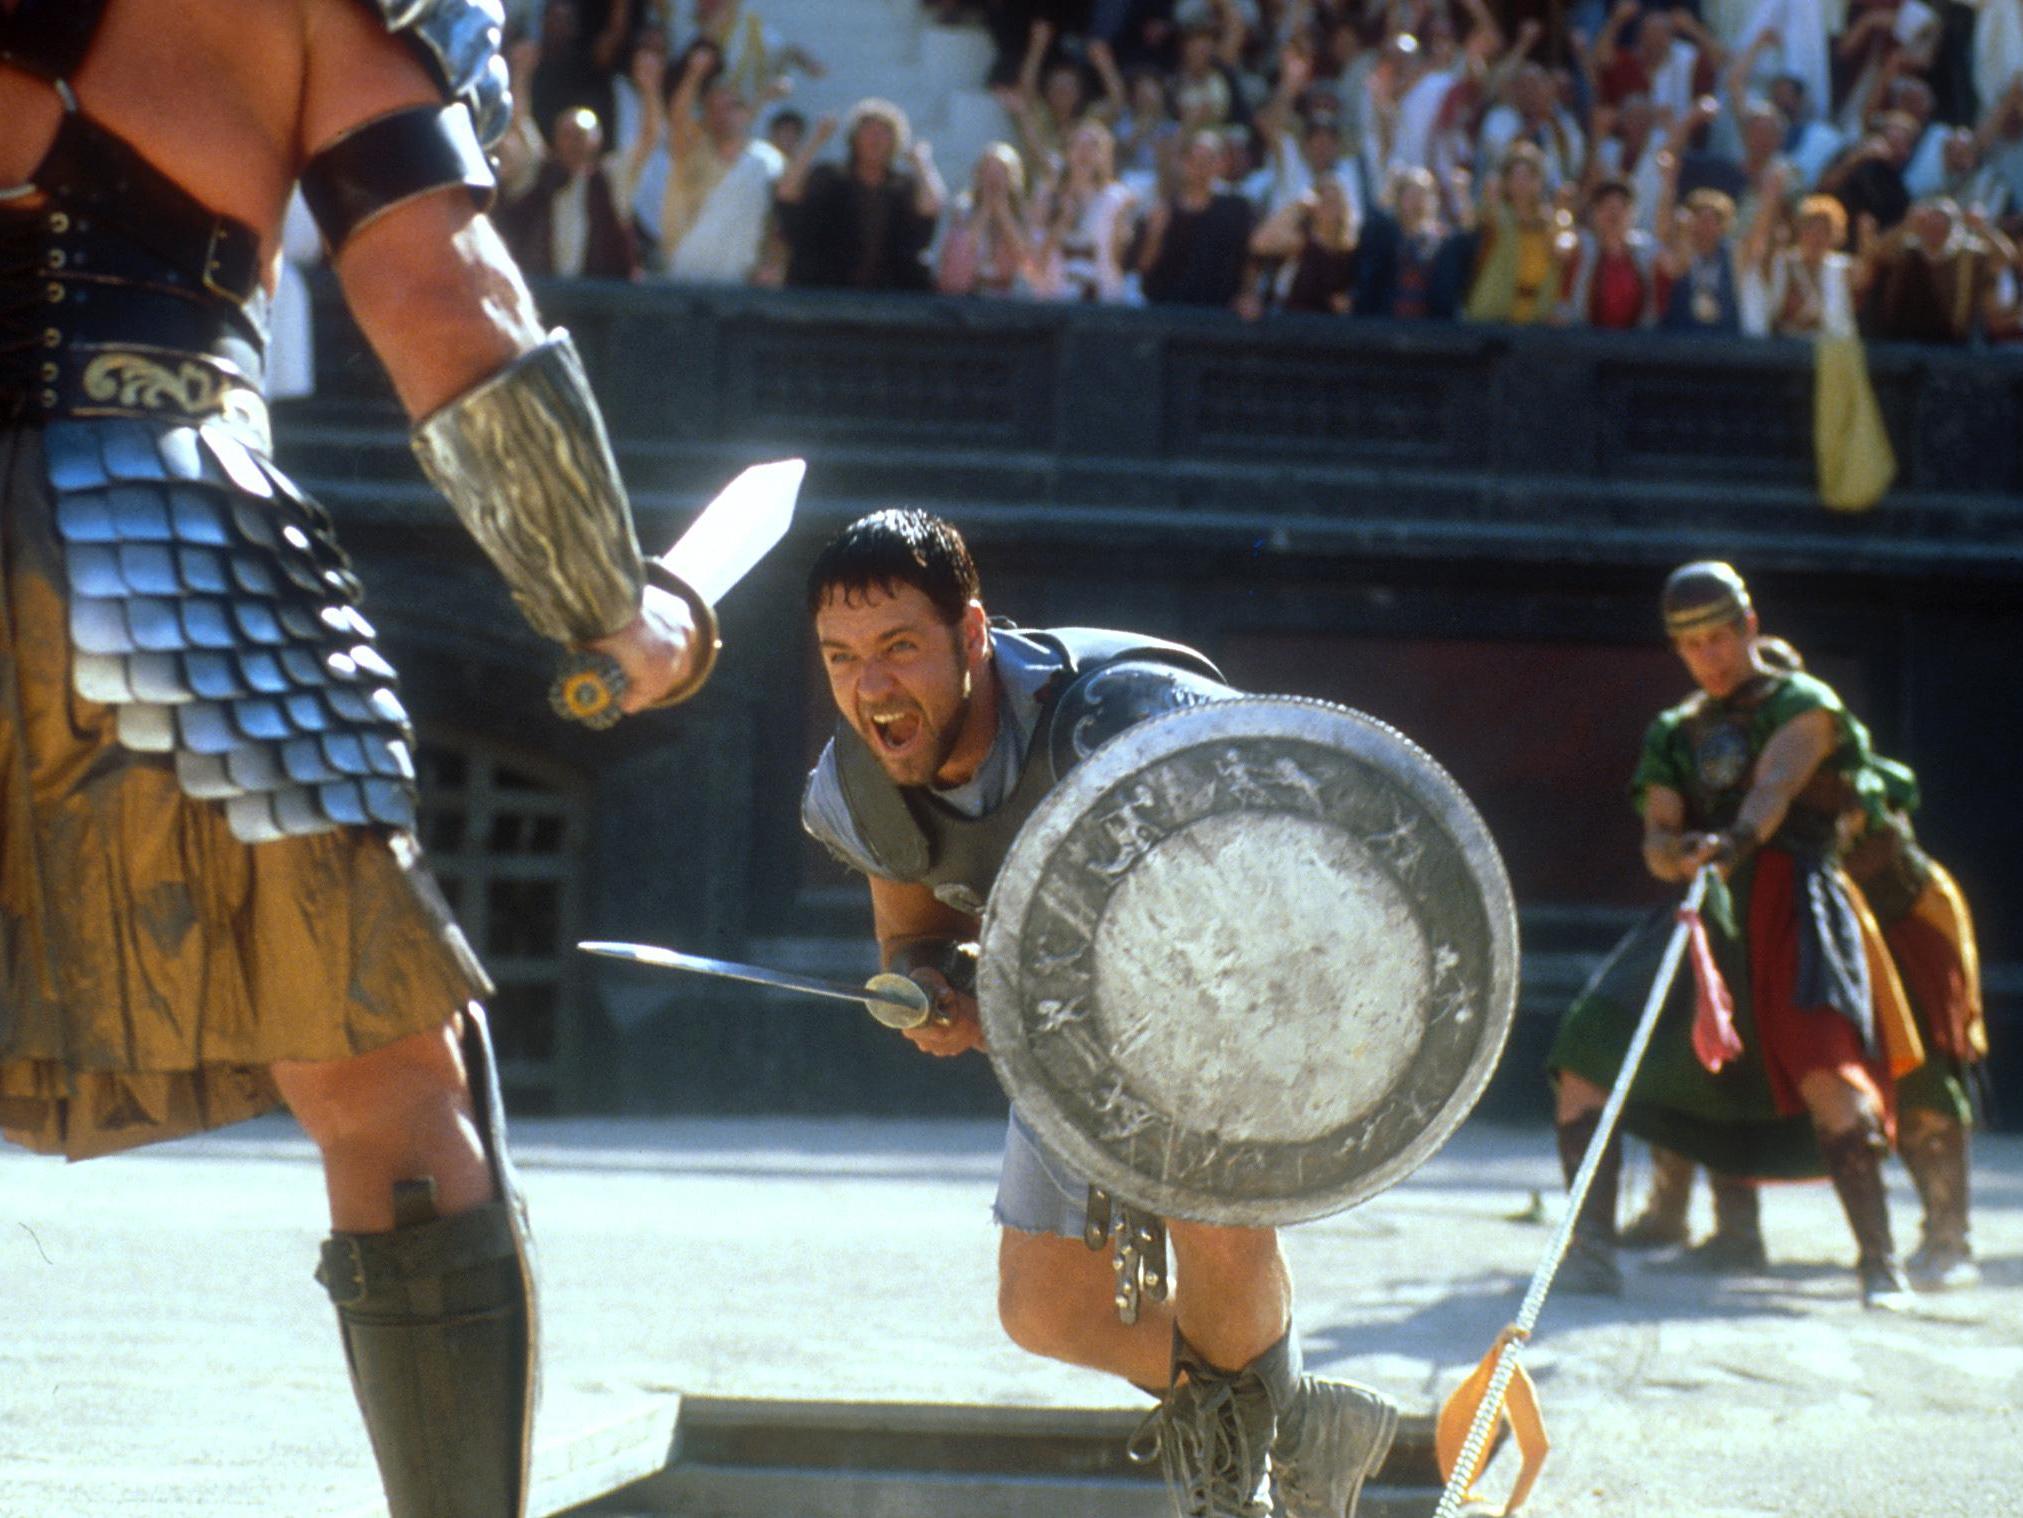 Maximus (Russell Crowe) charges at an opponent in the gladiatorial ring